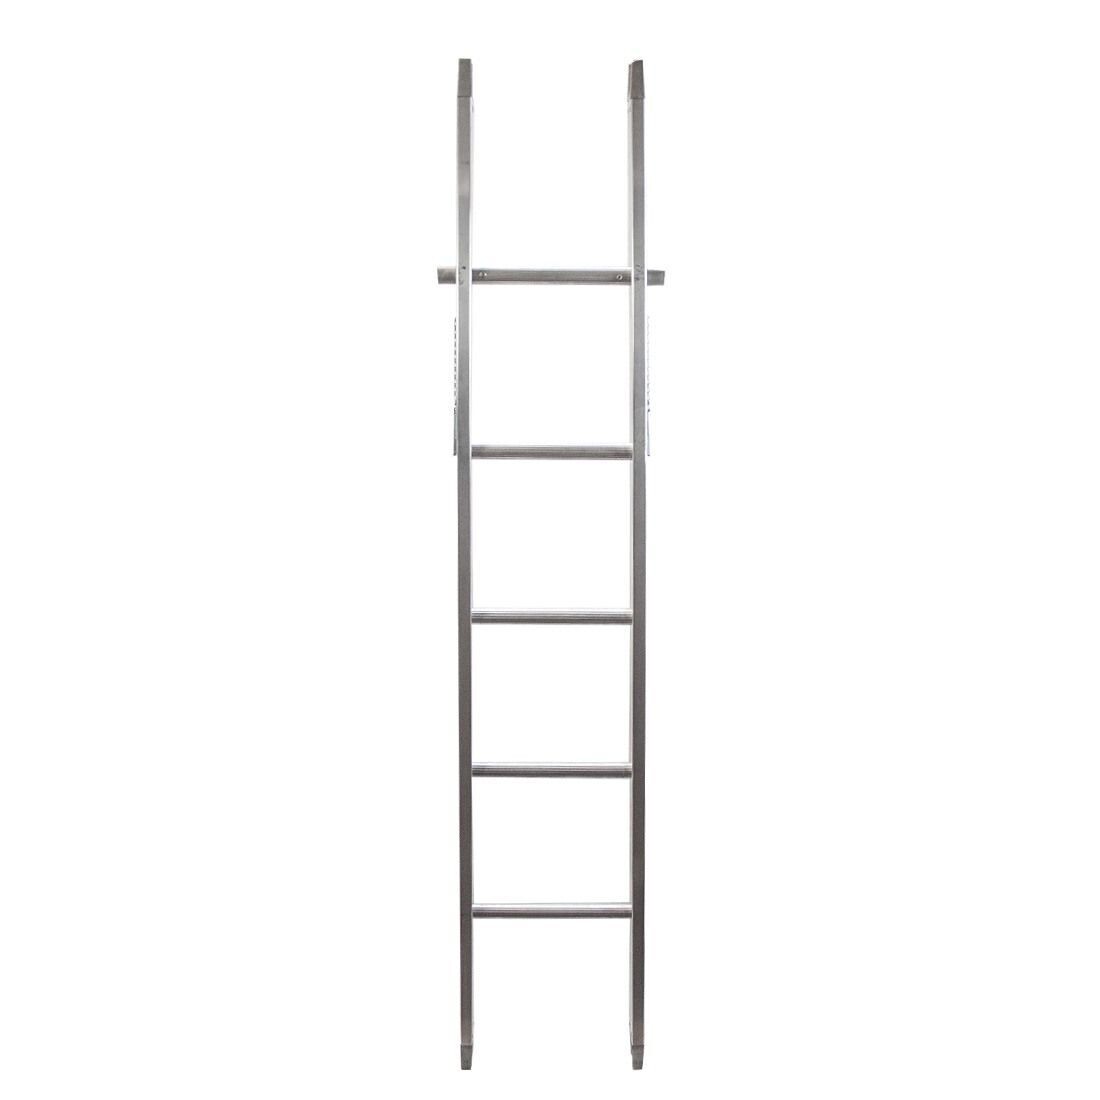 CENTER SECTION 6' SECTIONAL LADDER